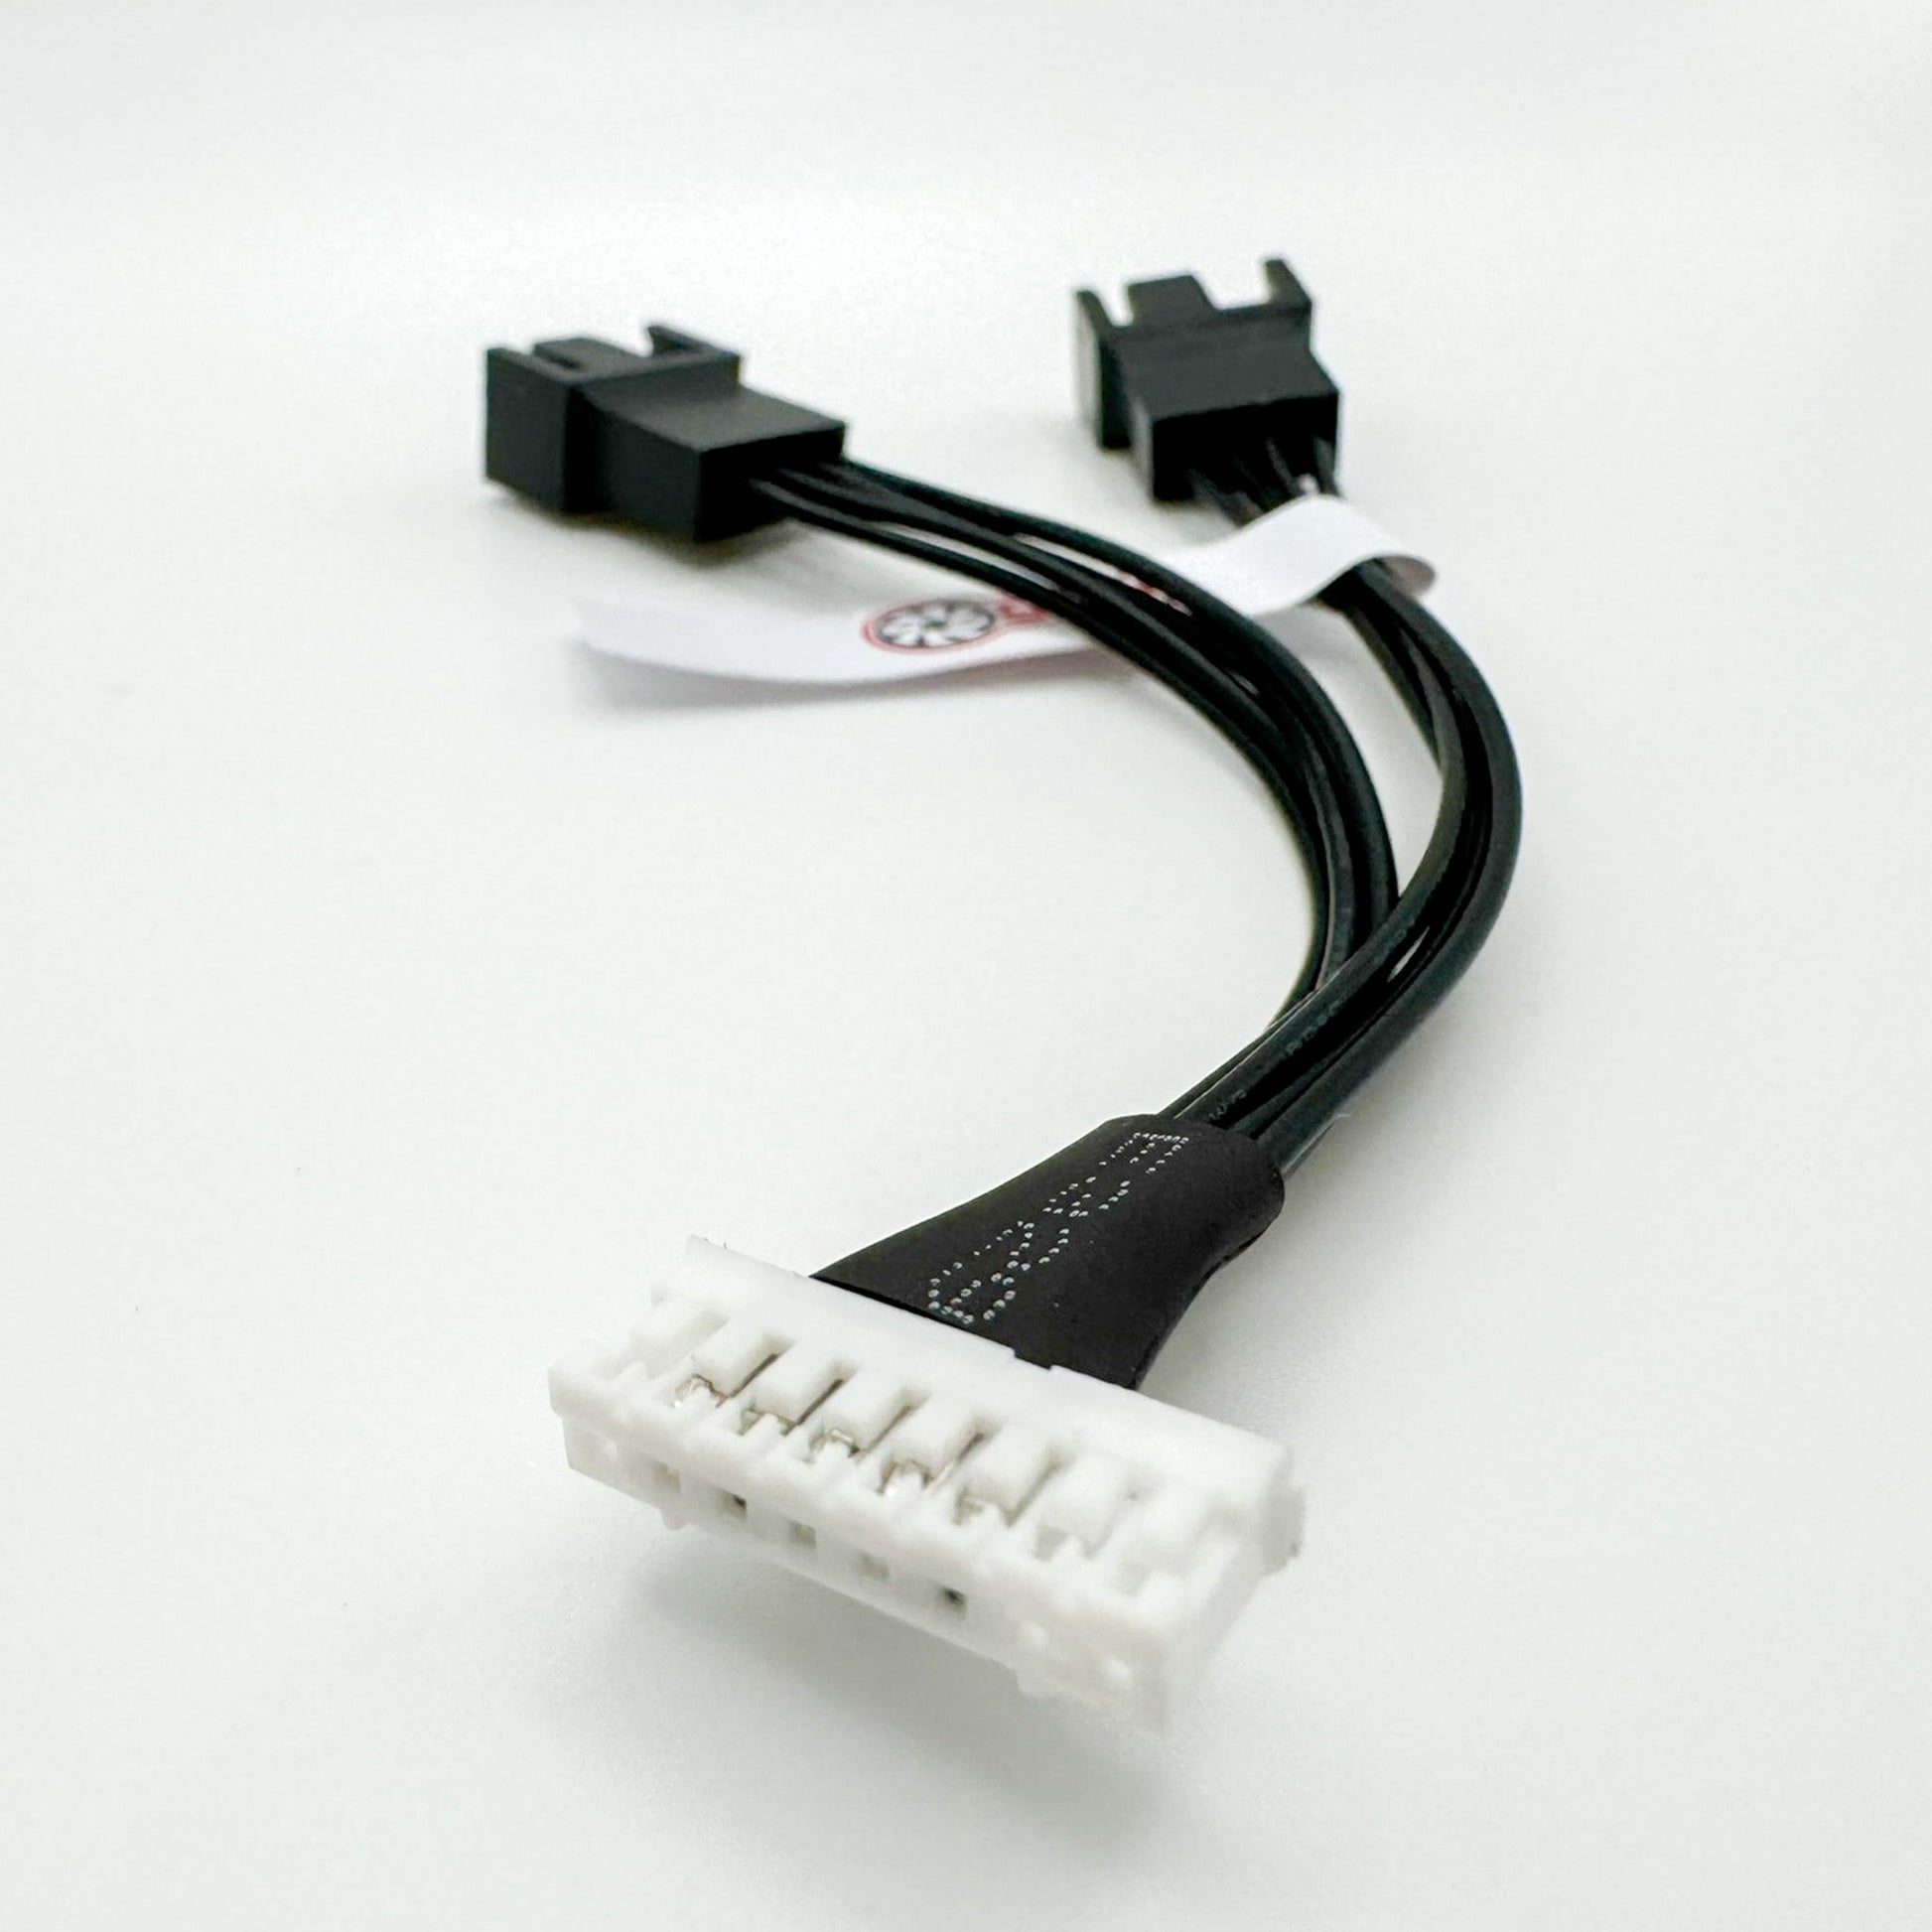 Sapphire TOXIC AMD Radeon RX 6900 XT AIR COOLED PWM Adapter Deshroud Cable - GPUCONNECT.COM